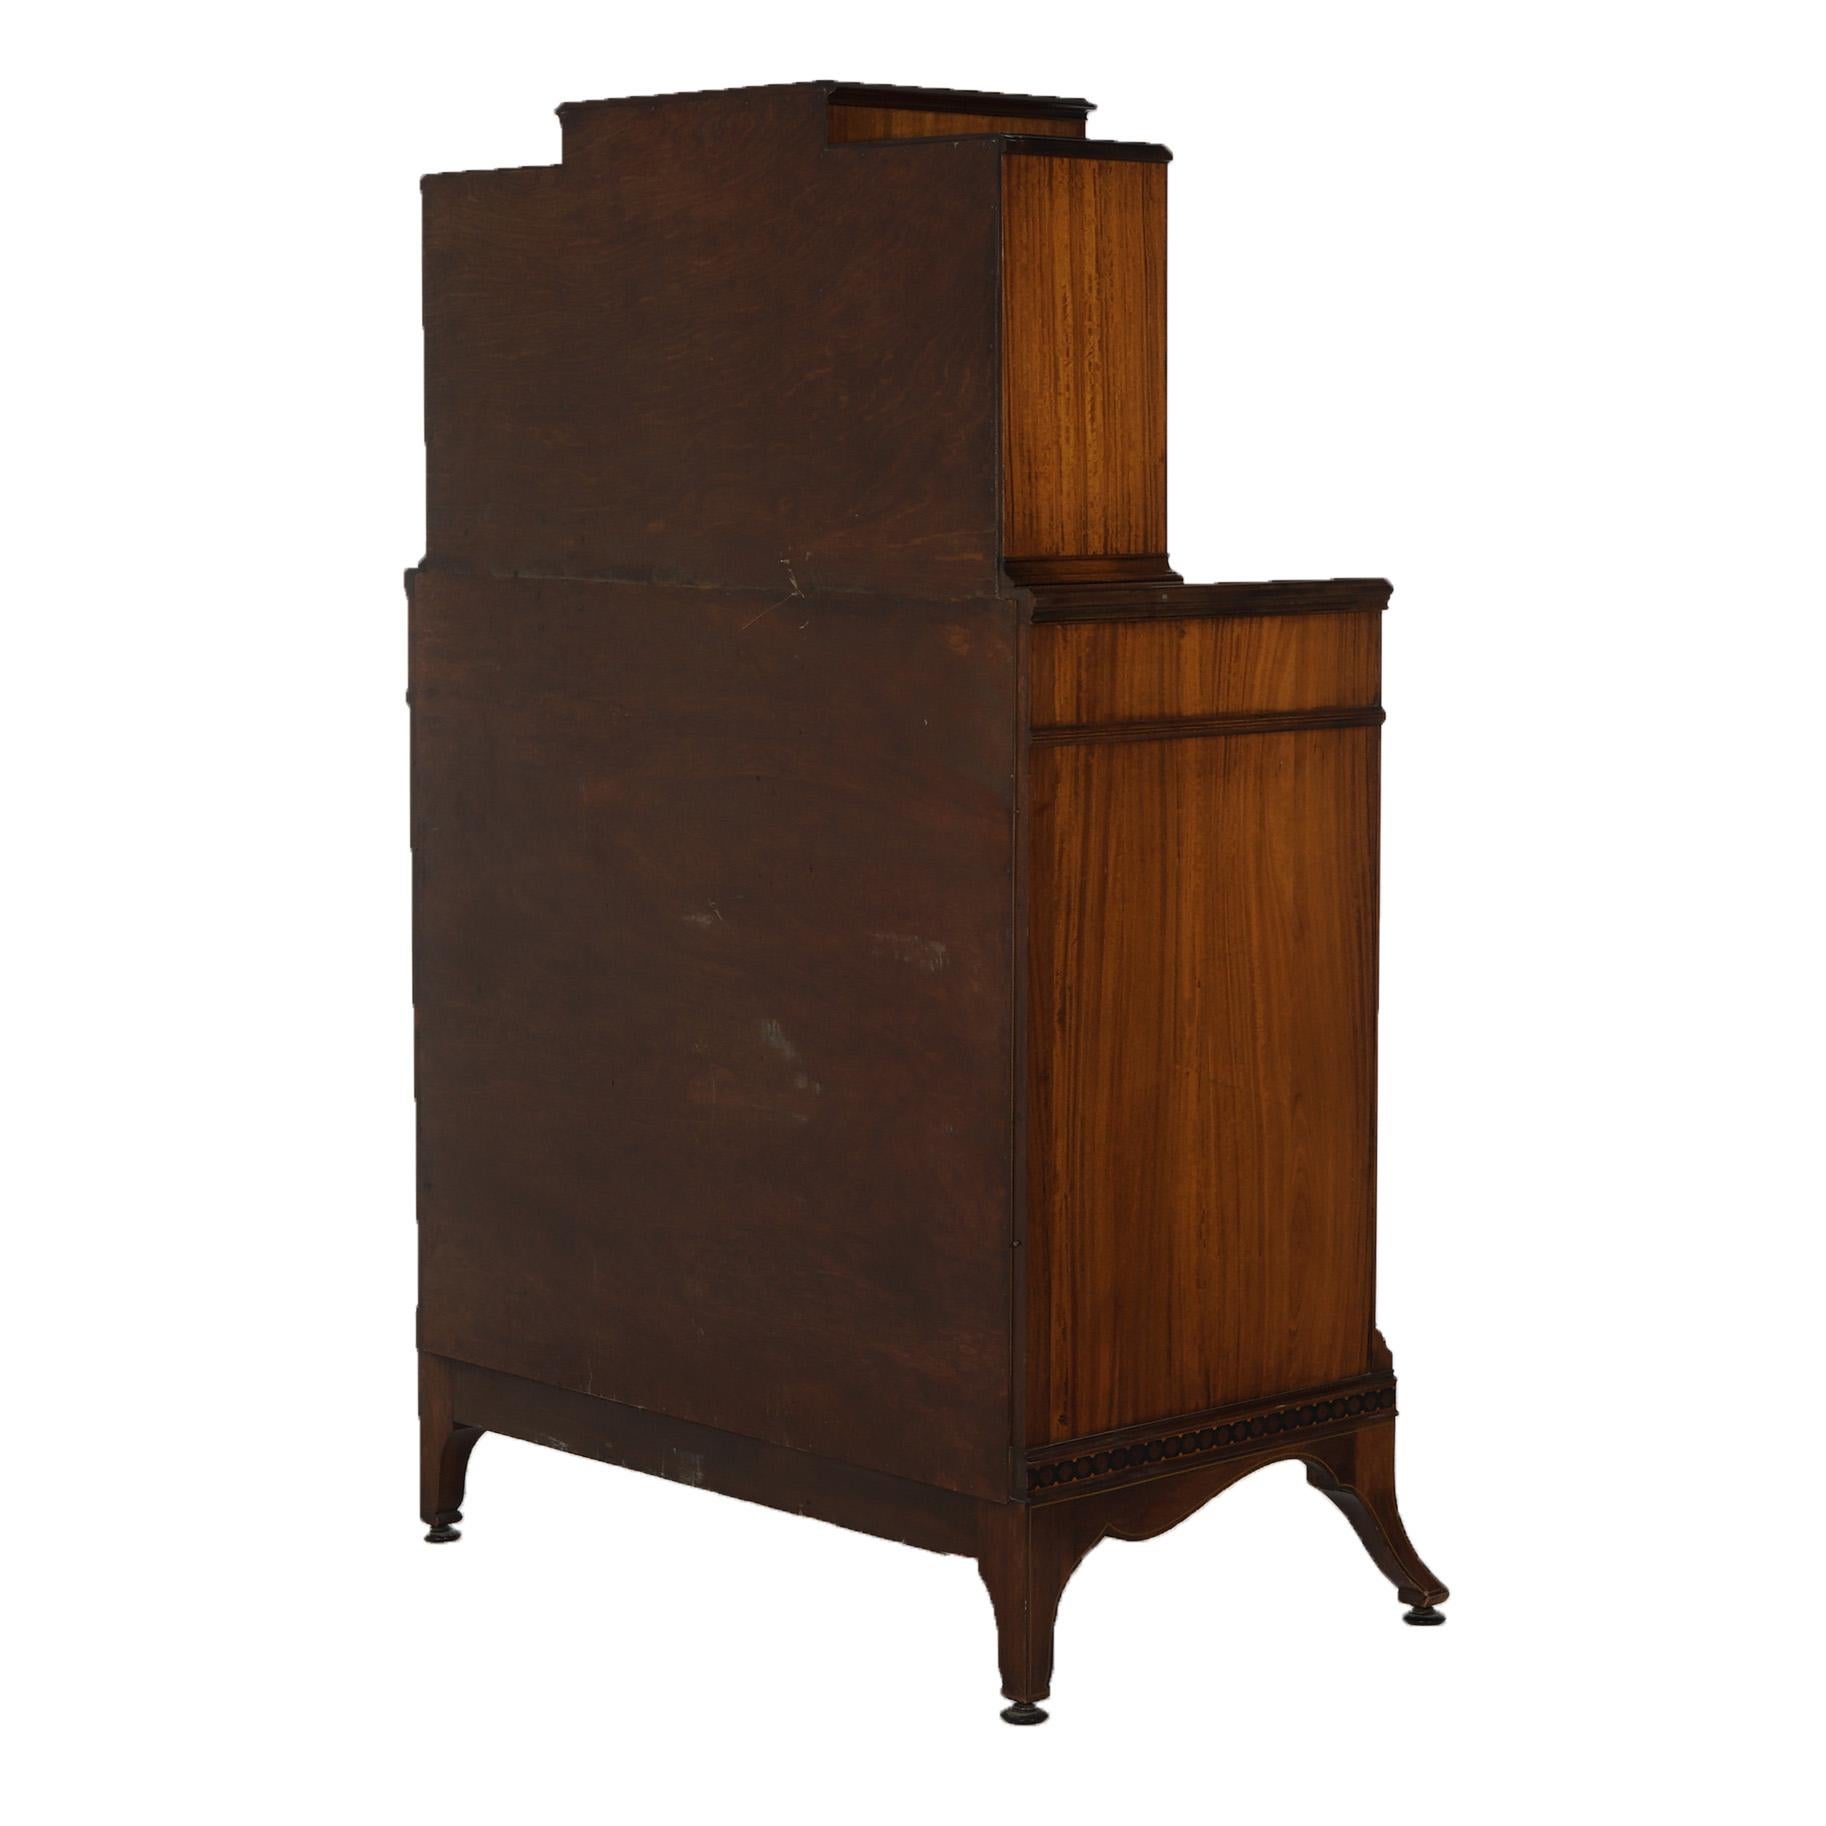 Antique Johnson Furniture Co. Satinwood & Mahogany Marquetry Chifferobe Dresser For Sale 9